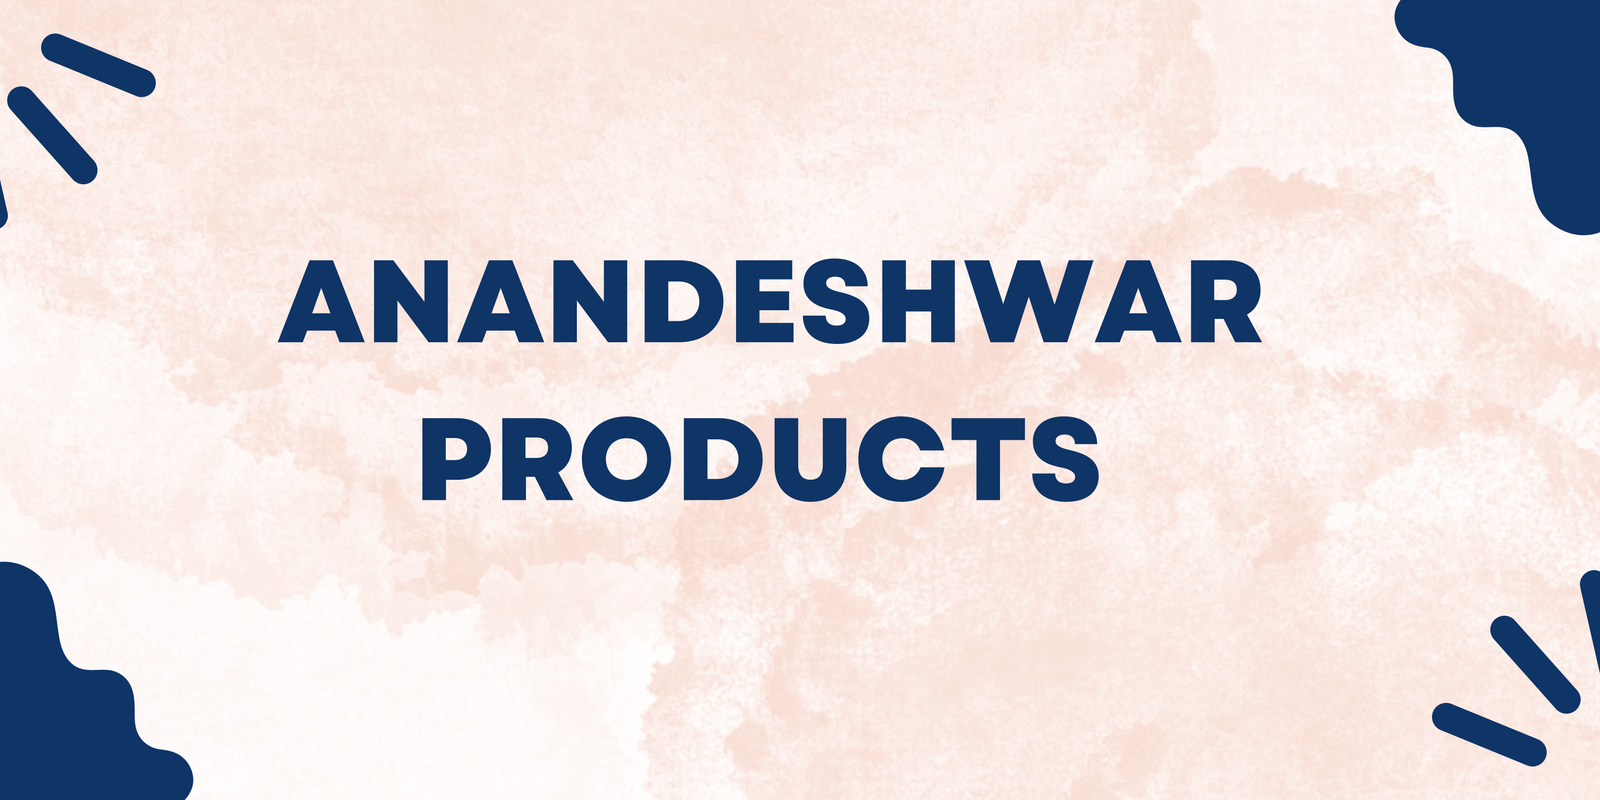 ANANDESHWAR PRODUCTS